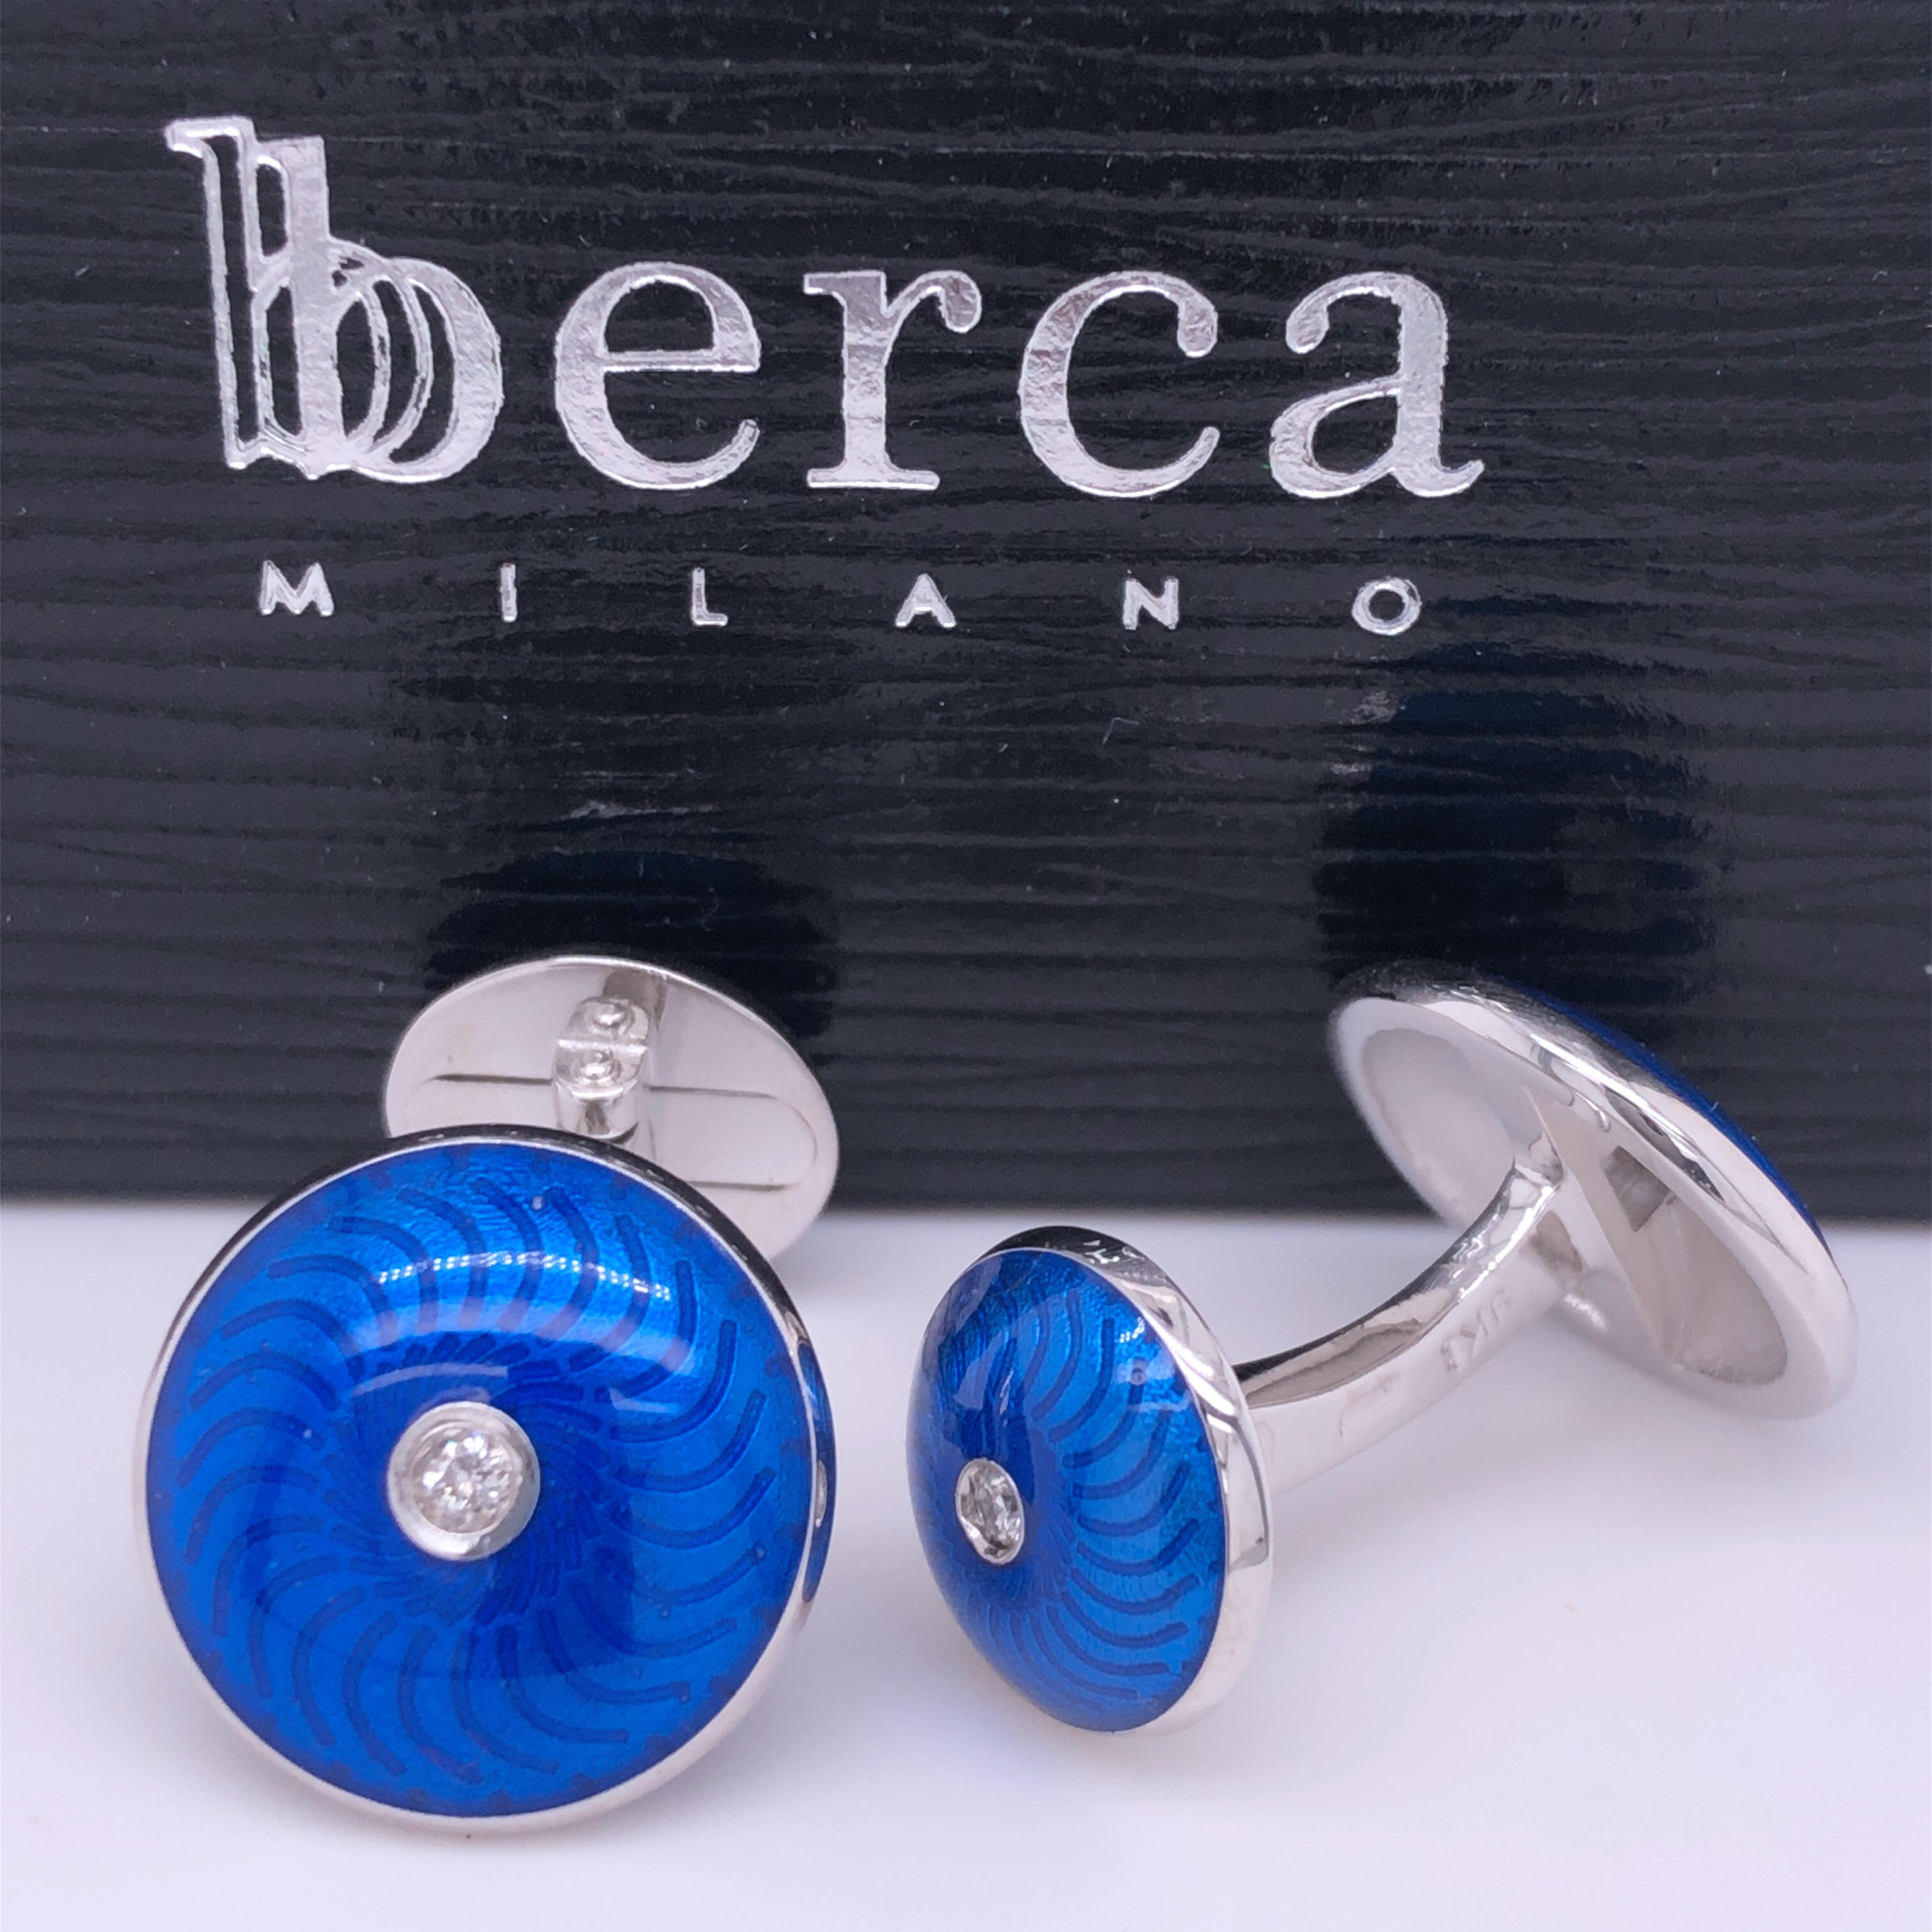 Unique, absolutely Chic yet Timeless 0.11 Carat White Diamond in a Navy Blue Guilloché Hand Enamelled Round Cabochon Shaped White Gold Setting Cufflinks.
In our fitted Tobacco Leather Case and Pouch.